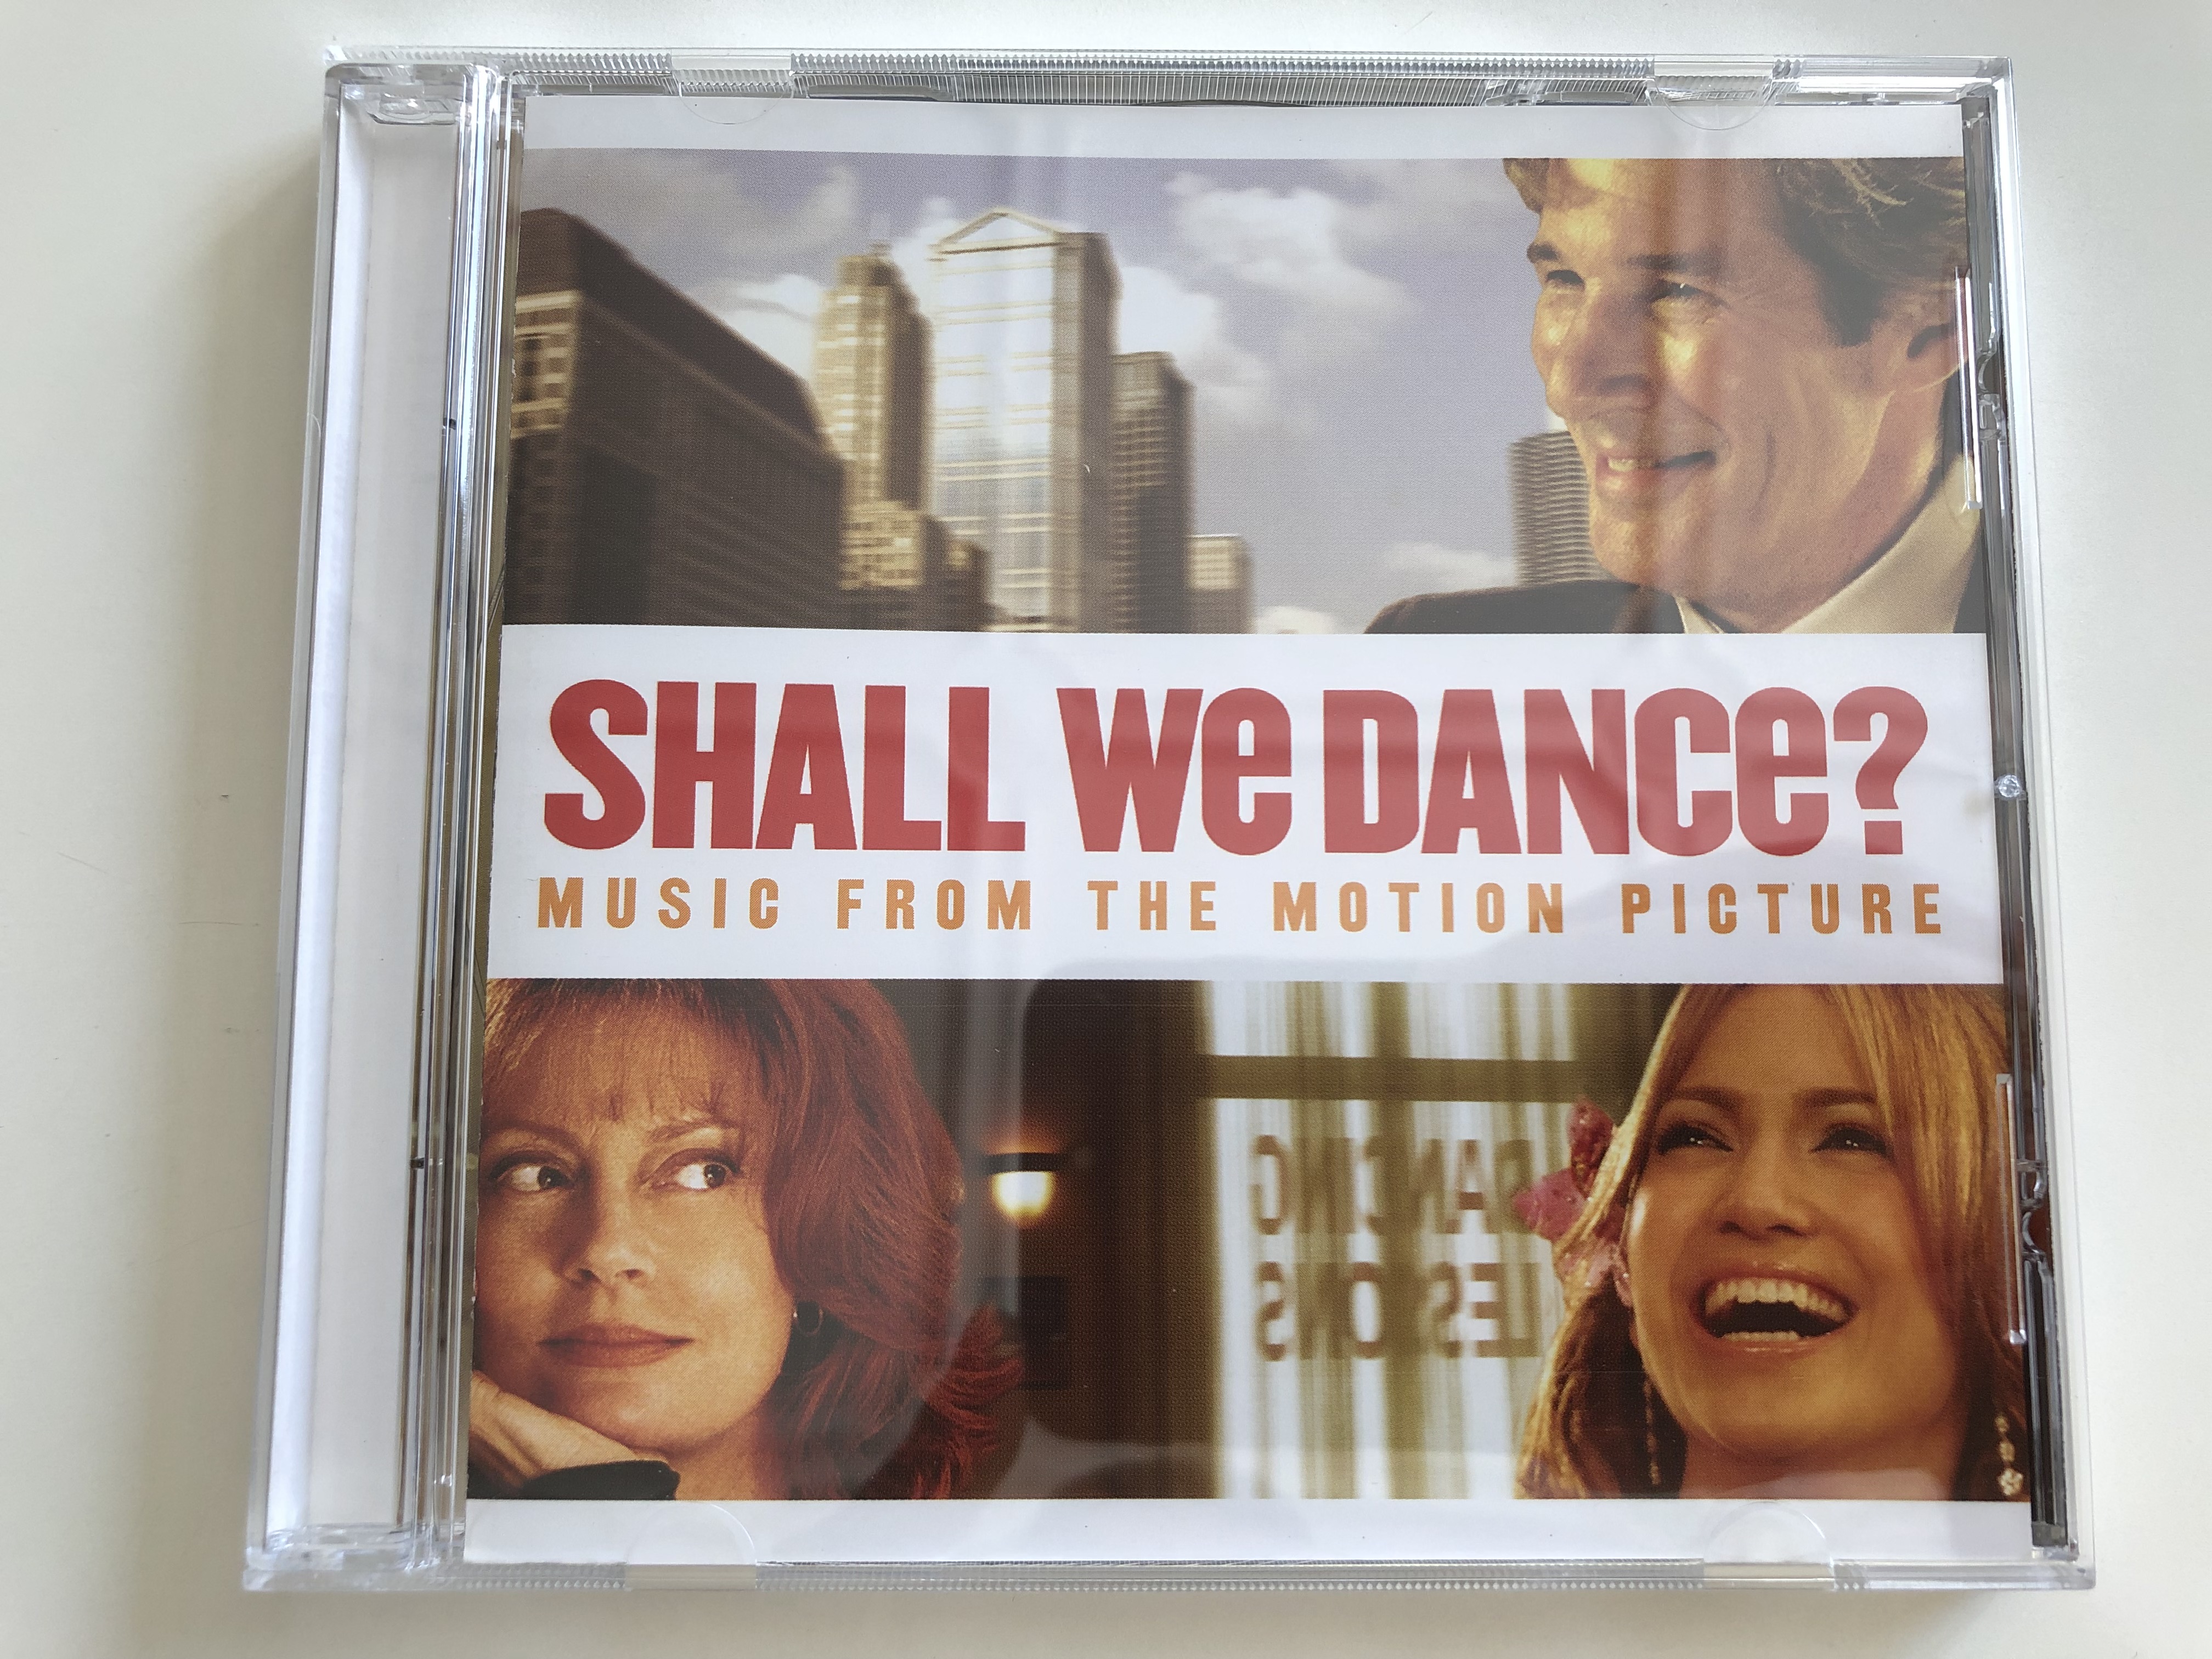 shall-we-dance-music-from-the-motion-picture-audio-cd-2004-soundtrack-produced-by-randy-spendlove-1-.jpg